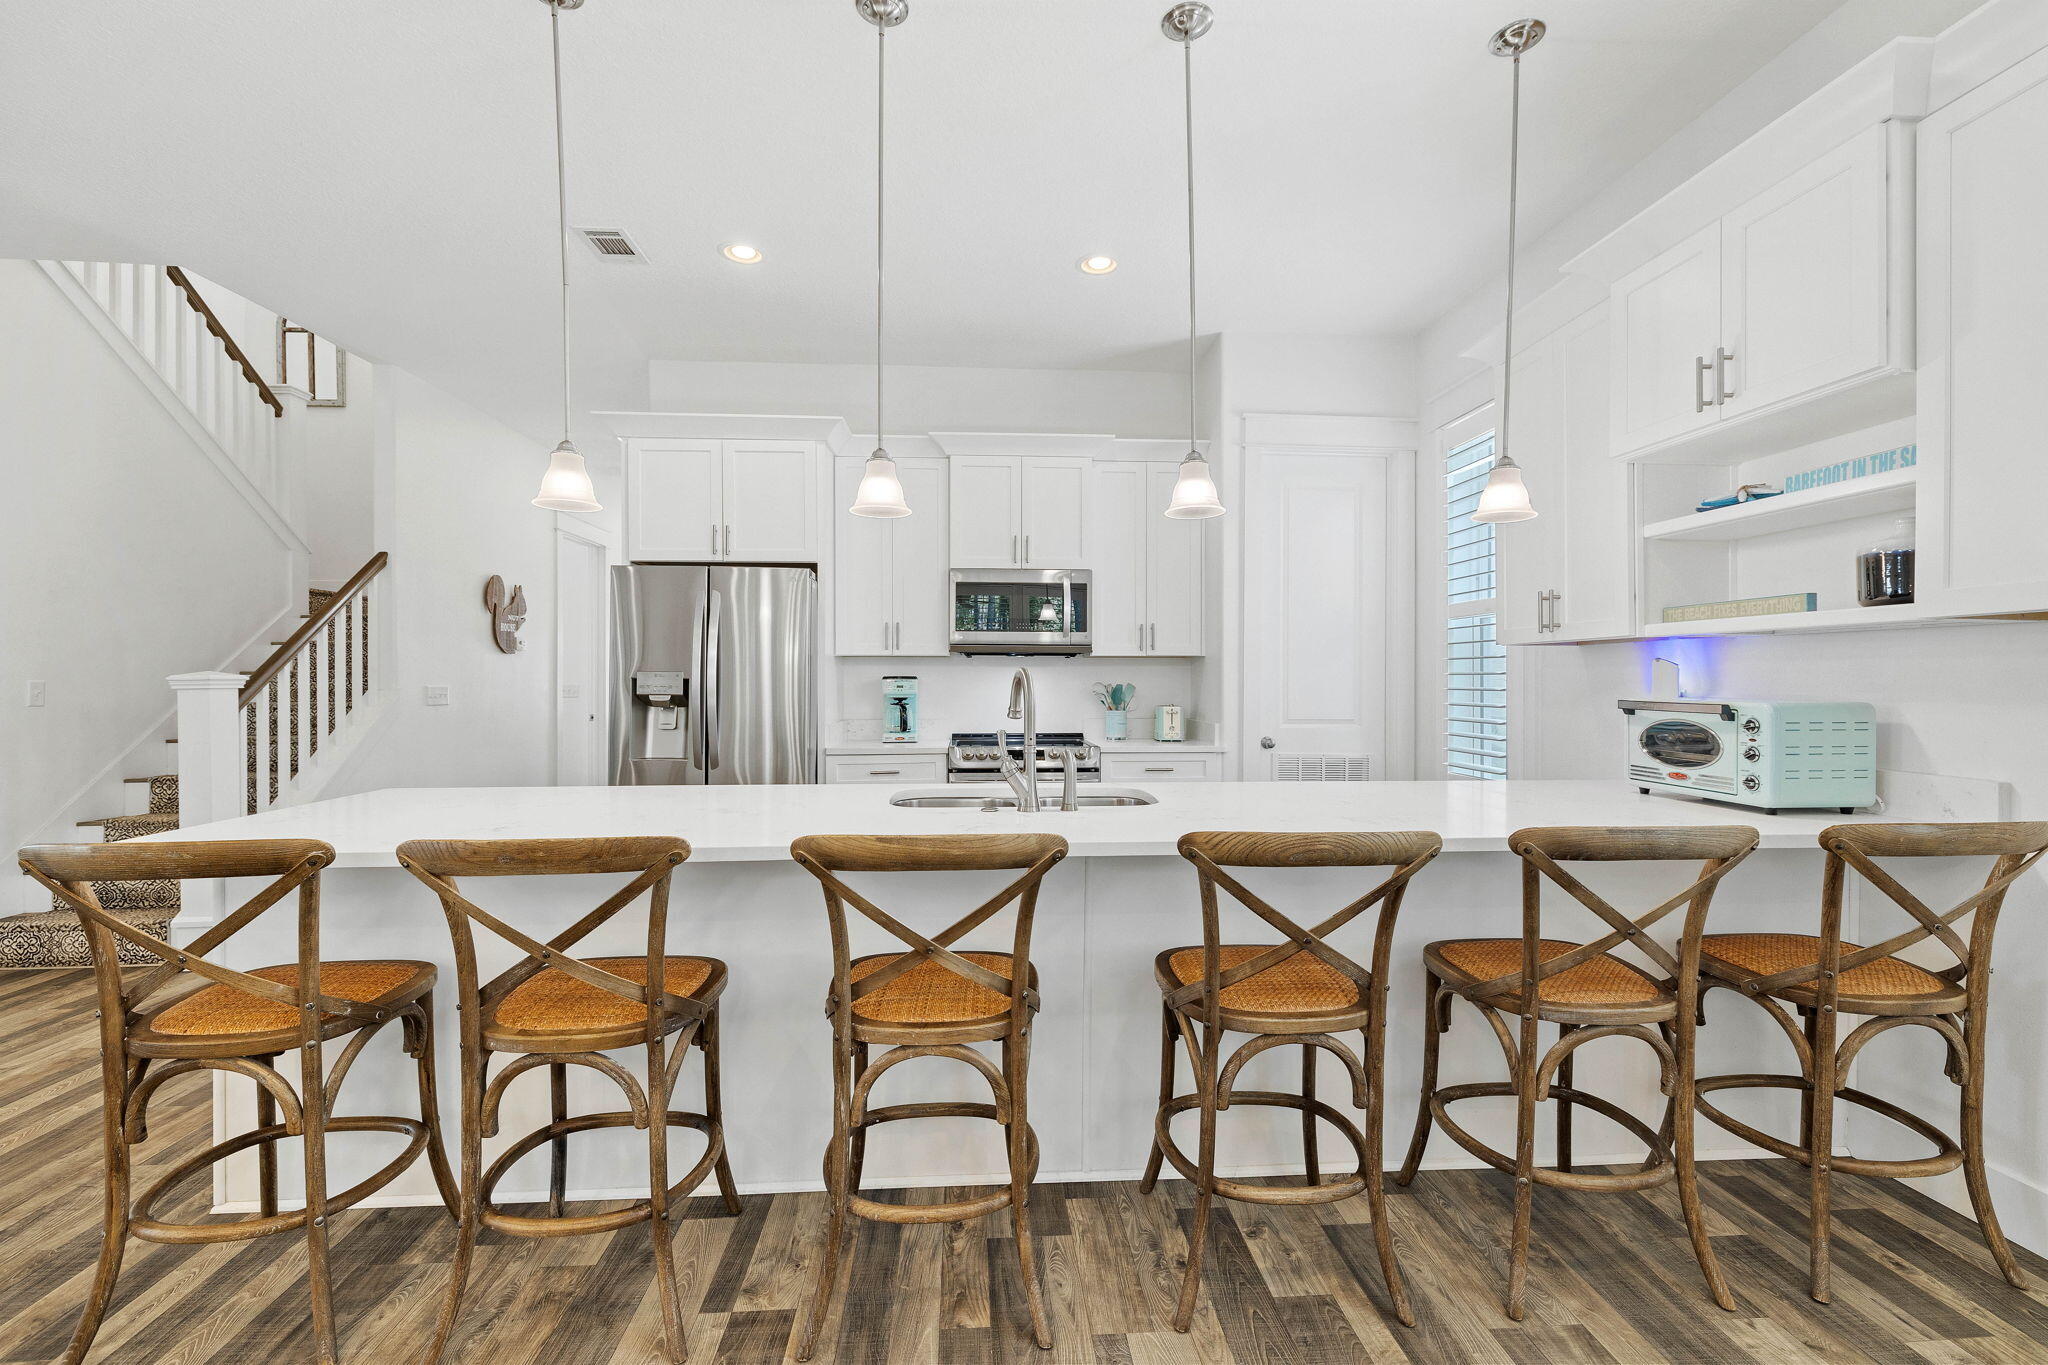 a dinning area with stainless steel appliances kitchen island granite countertop furniture and a wooden floor